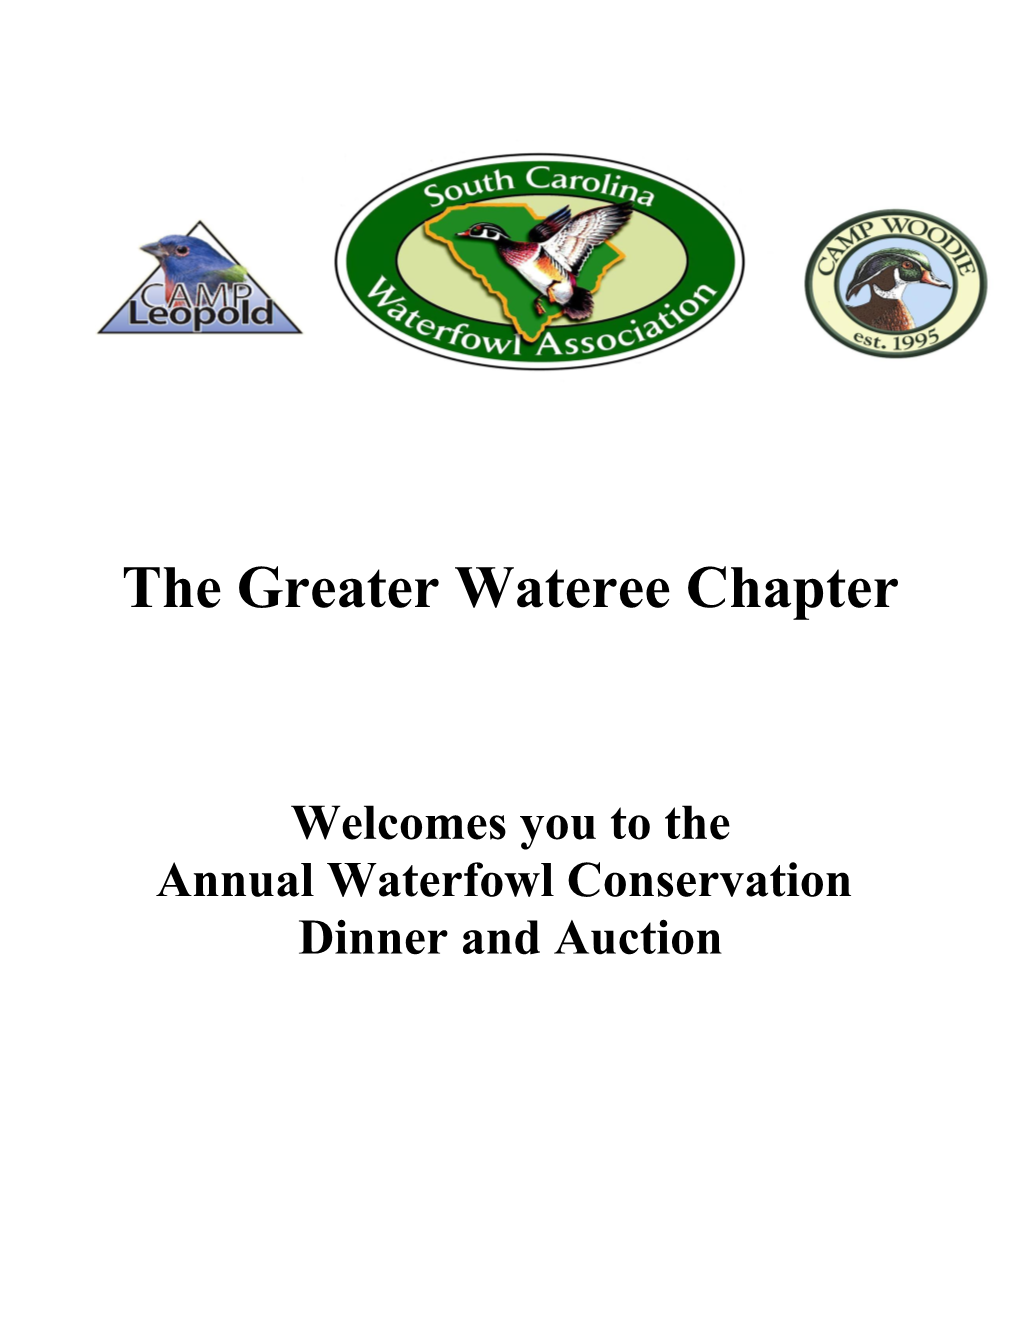 The Greater Wateree Chapter